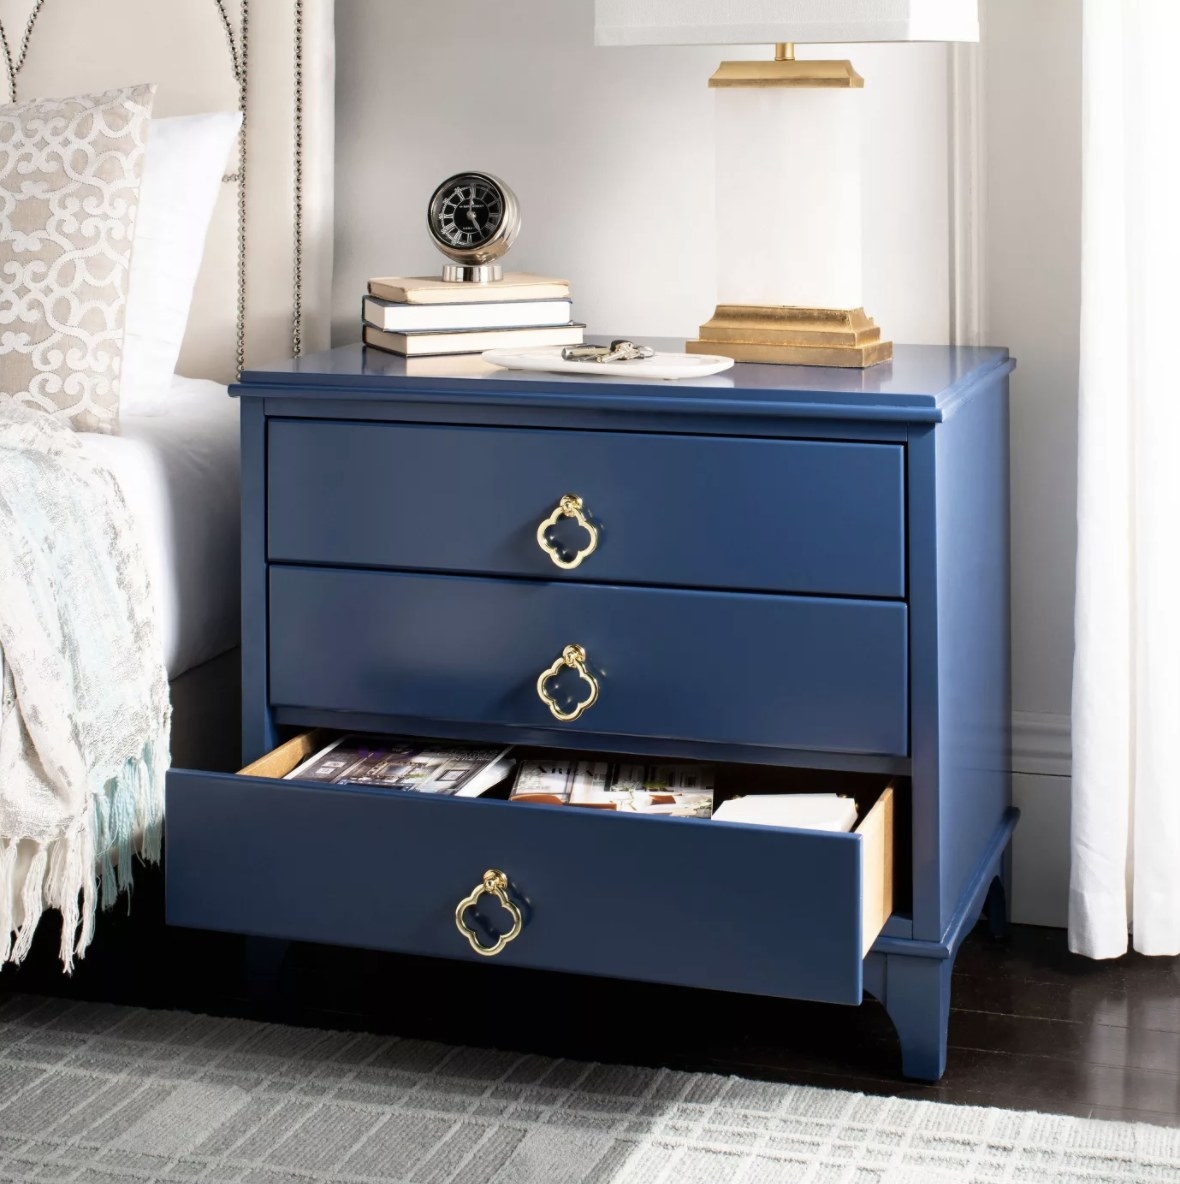 The navy blue dresser has gold handles and one drawer open full of items 